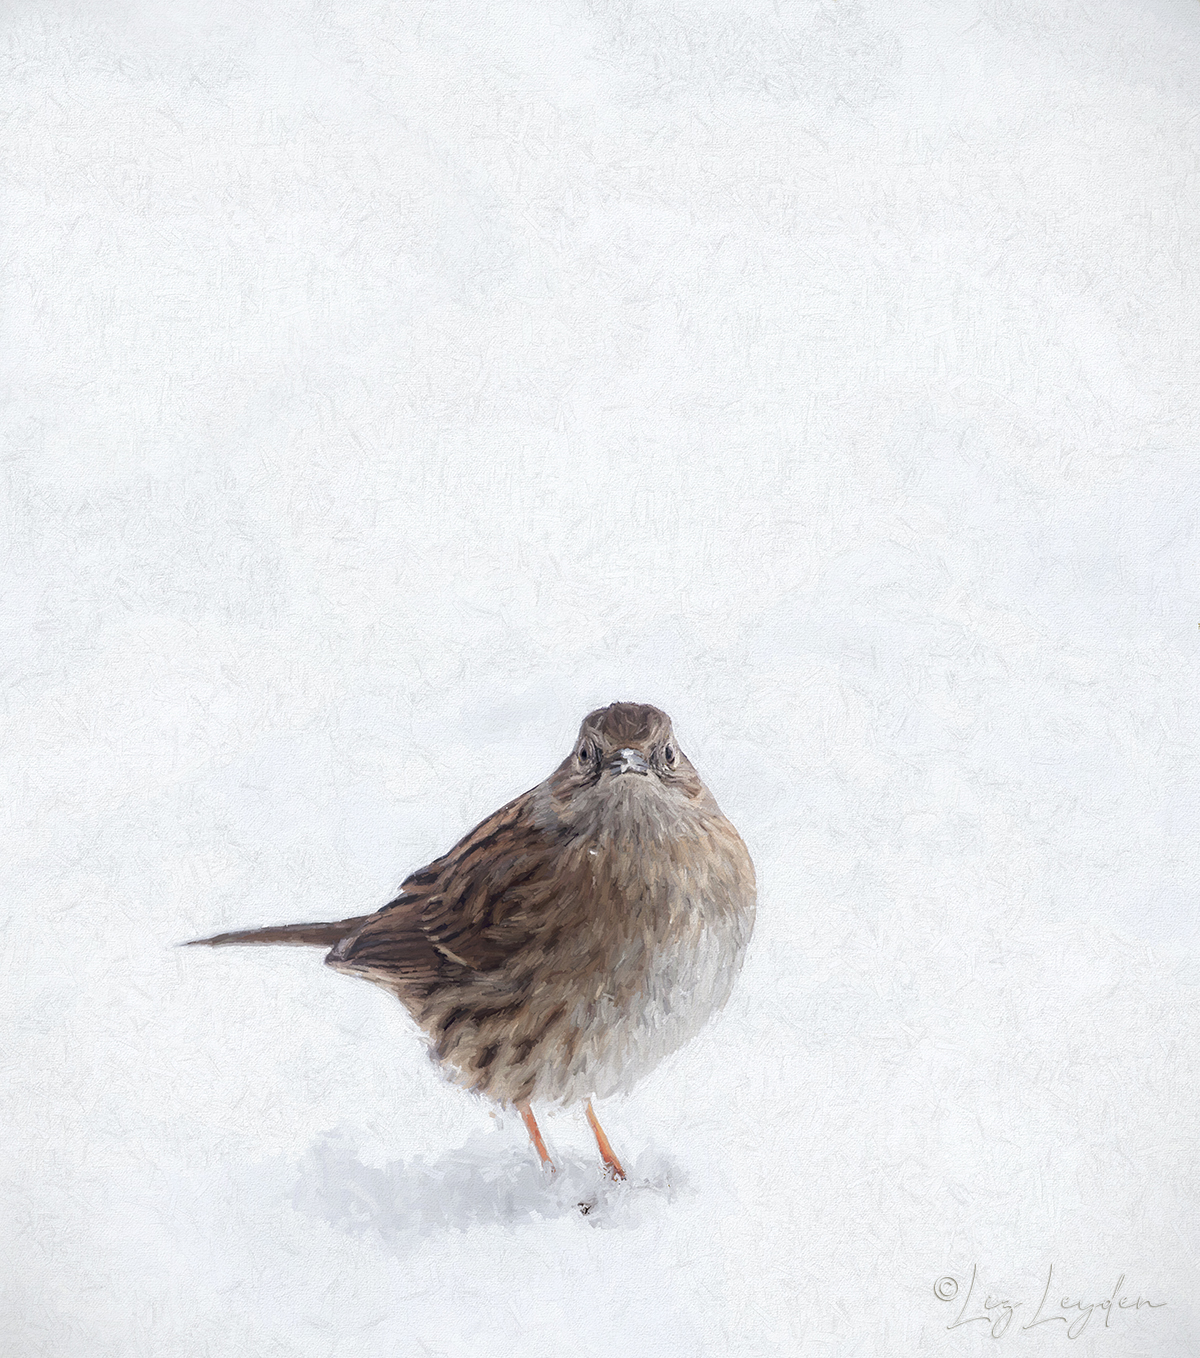 A Dunnock with its feet in snow